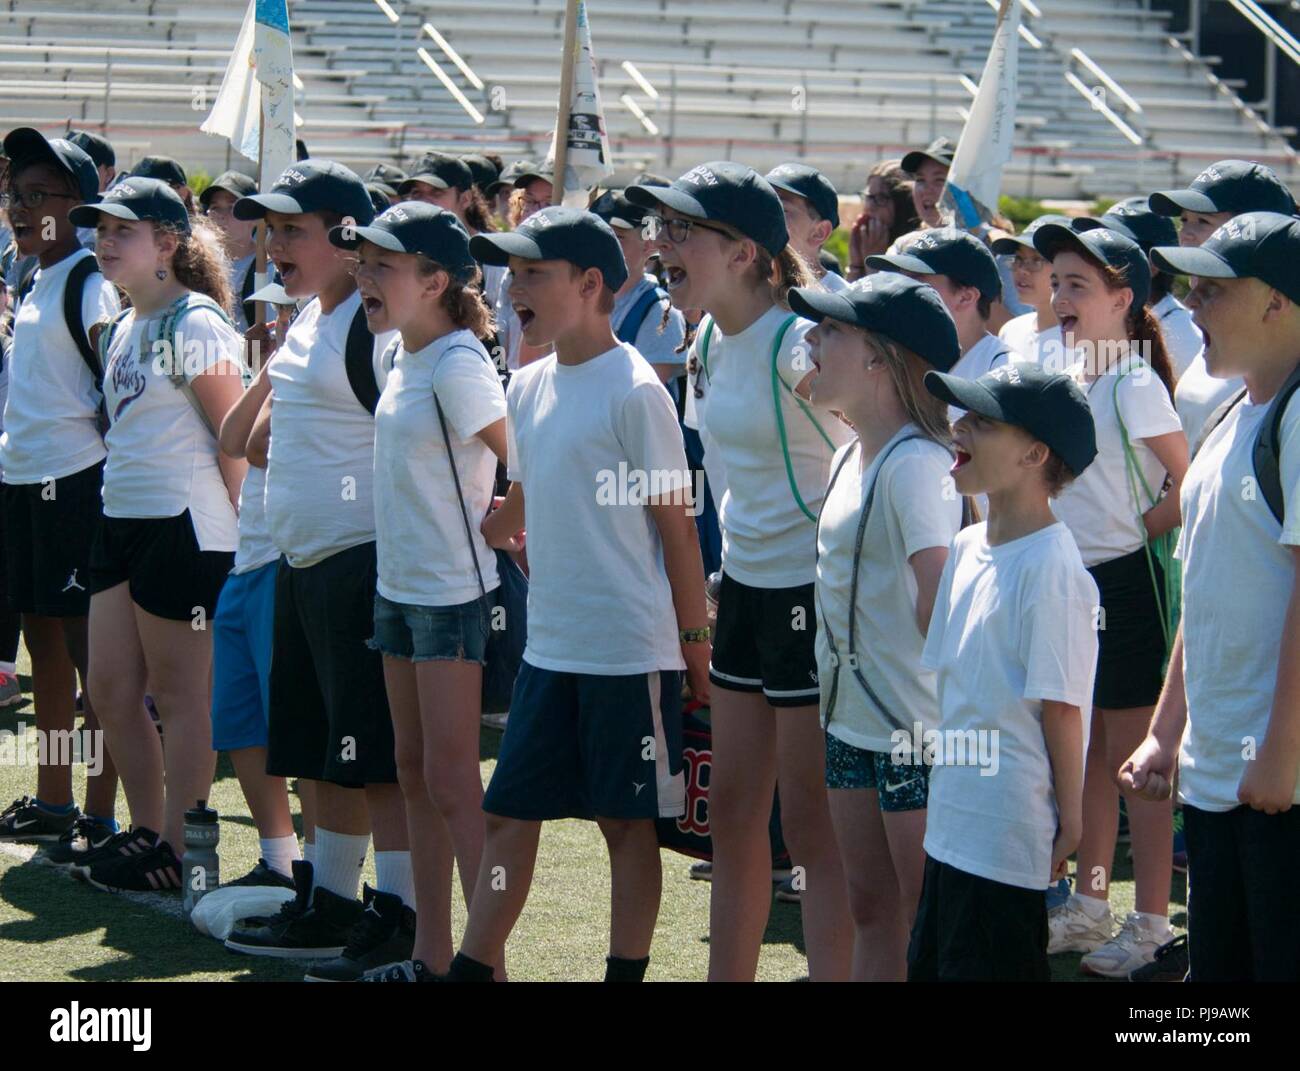 BOSTON – Junior Police Academy cadets from Malden, Massachusetts get motivated at Dillboy Stadium in Somerville, Massachusetts before the Guard Fit Challenge there July 12, 2018. The Massachusetts National Guard and police departments from Everett, Malden and Somerville used the physical fitness program as a way to encourage engagement between public safety officials and young people. (Massachusetts National Guard Stock Photo